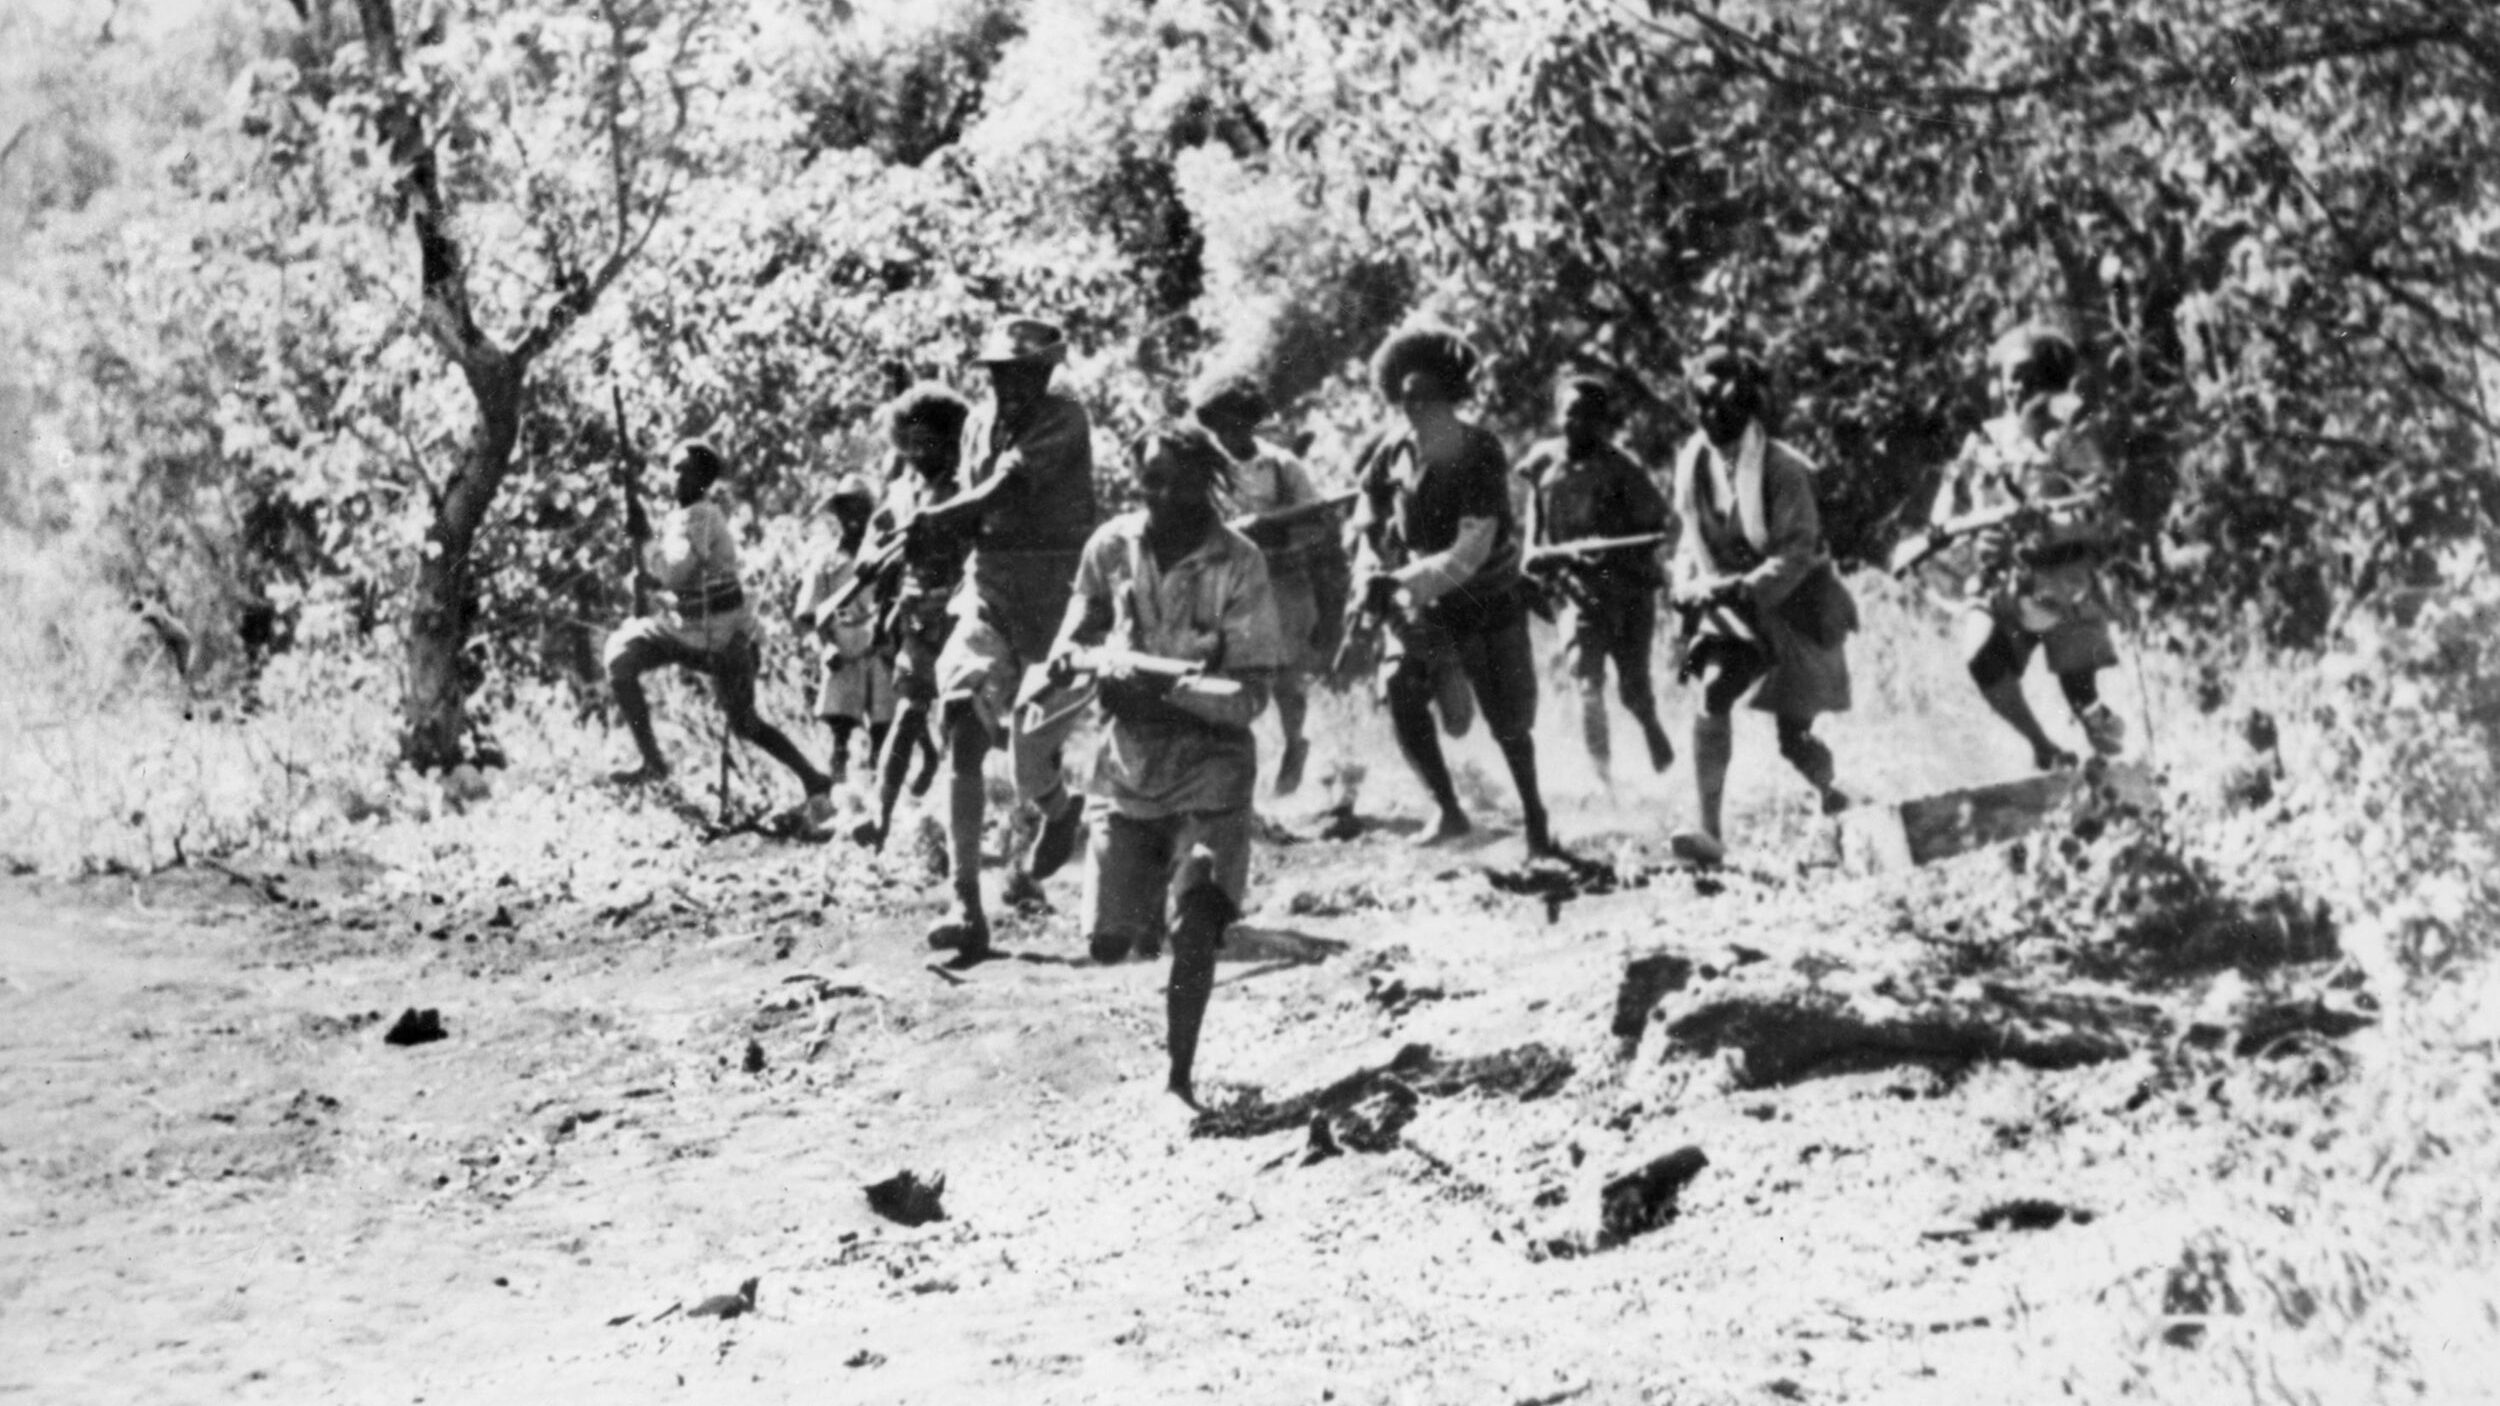 Having been issued ammunition, Abyssinian troops known as Shifta advance on the run to take up positions against the advancing enemy.